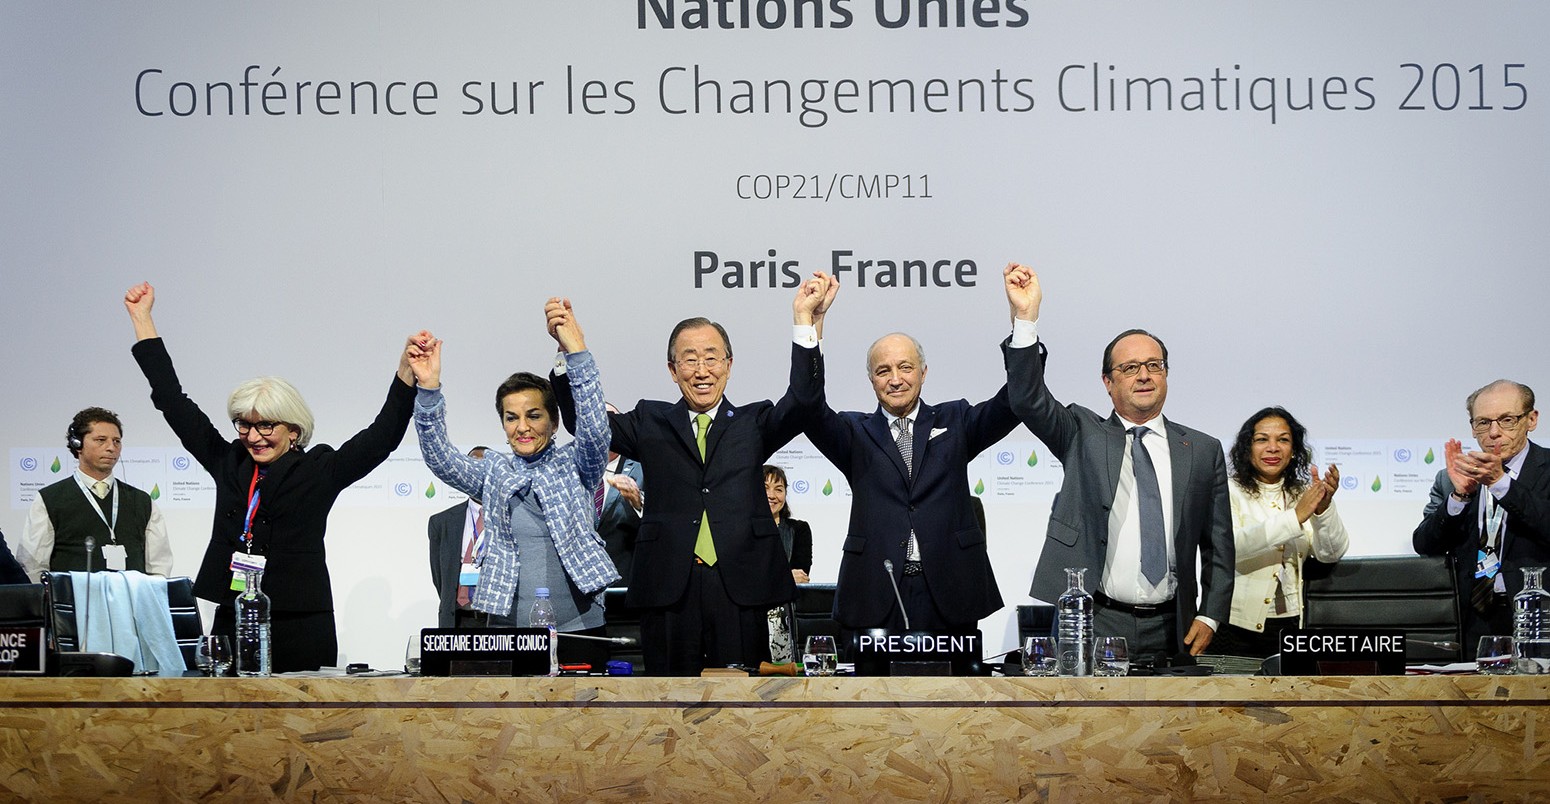 2015 United Nations Climate Change Conference Wikipedia